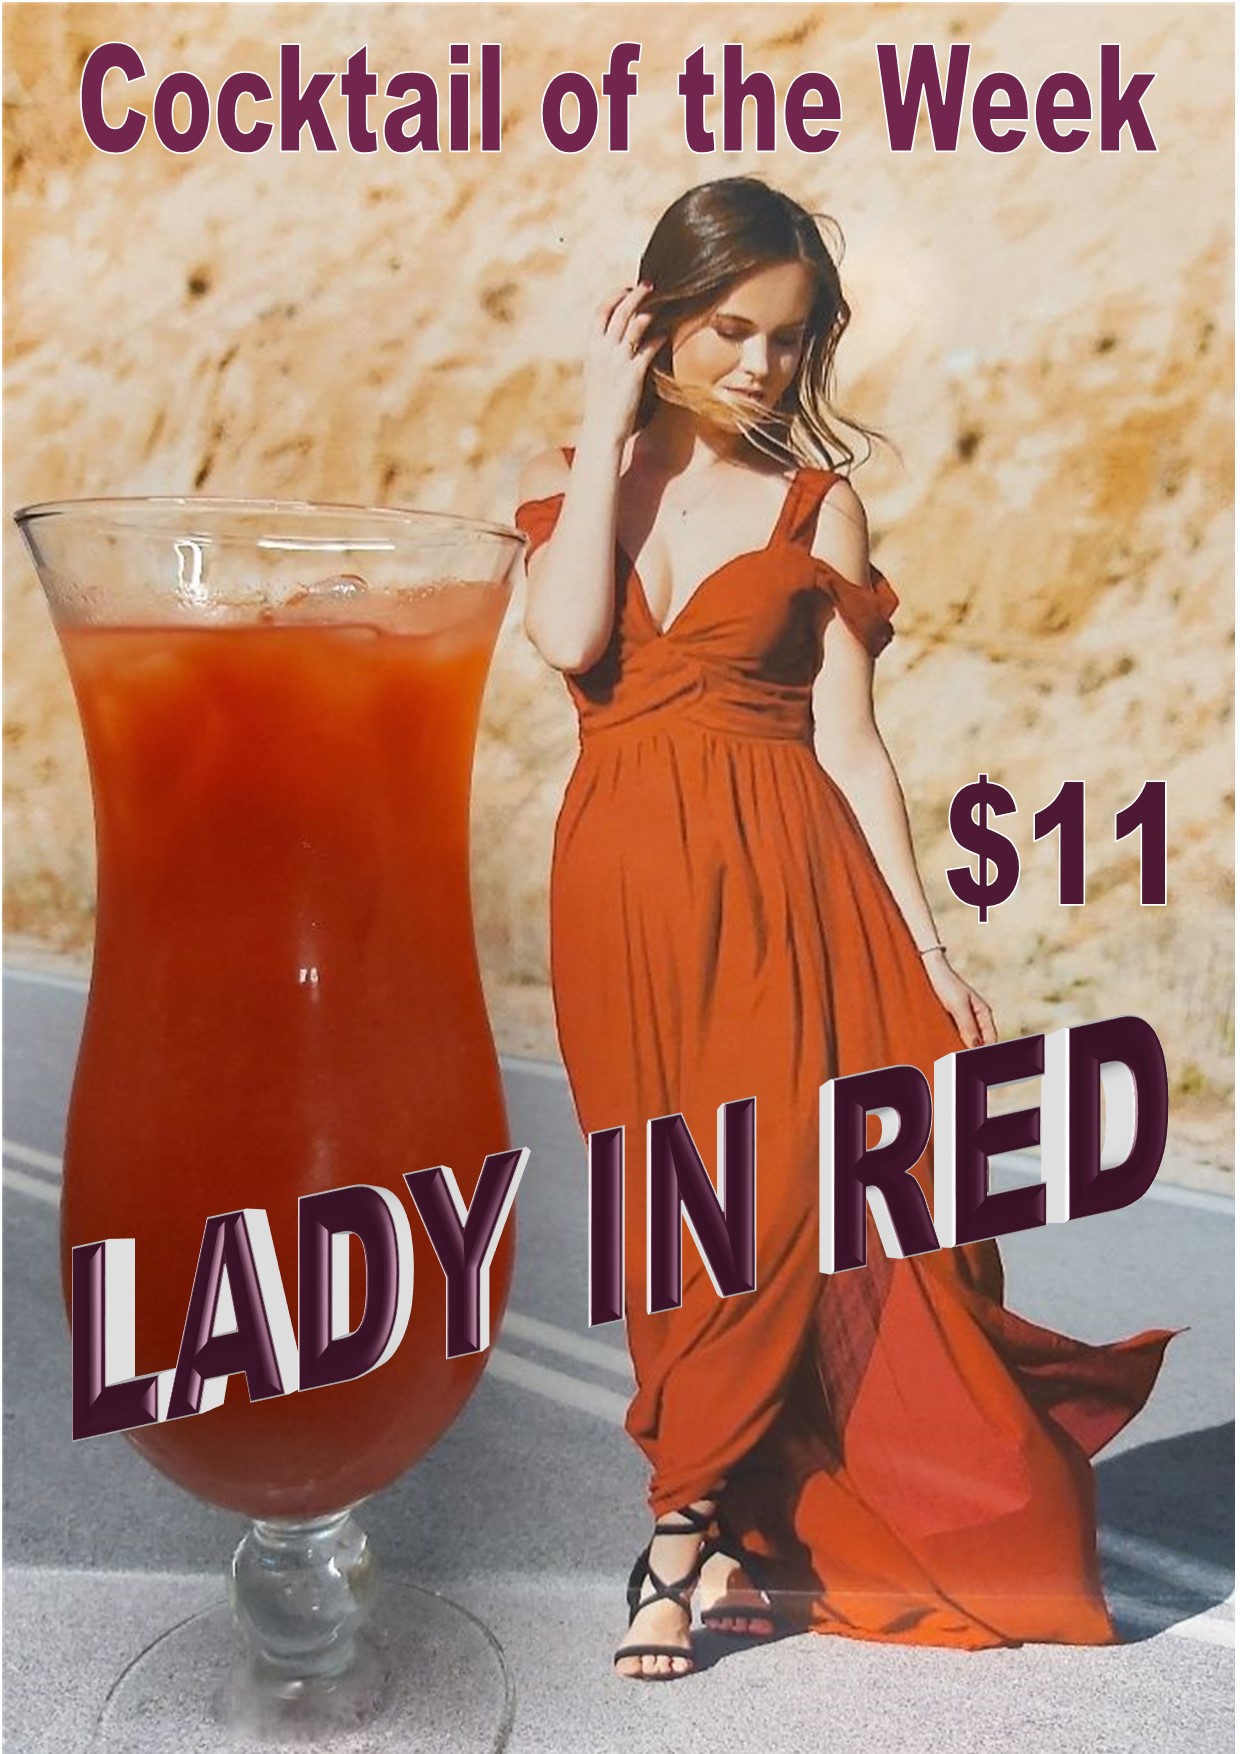 Lady in Red 2002